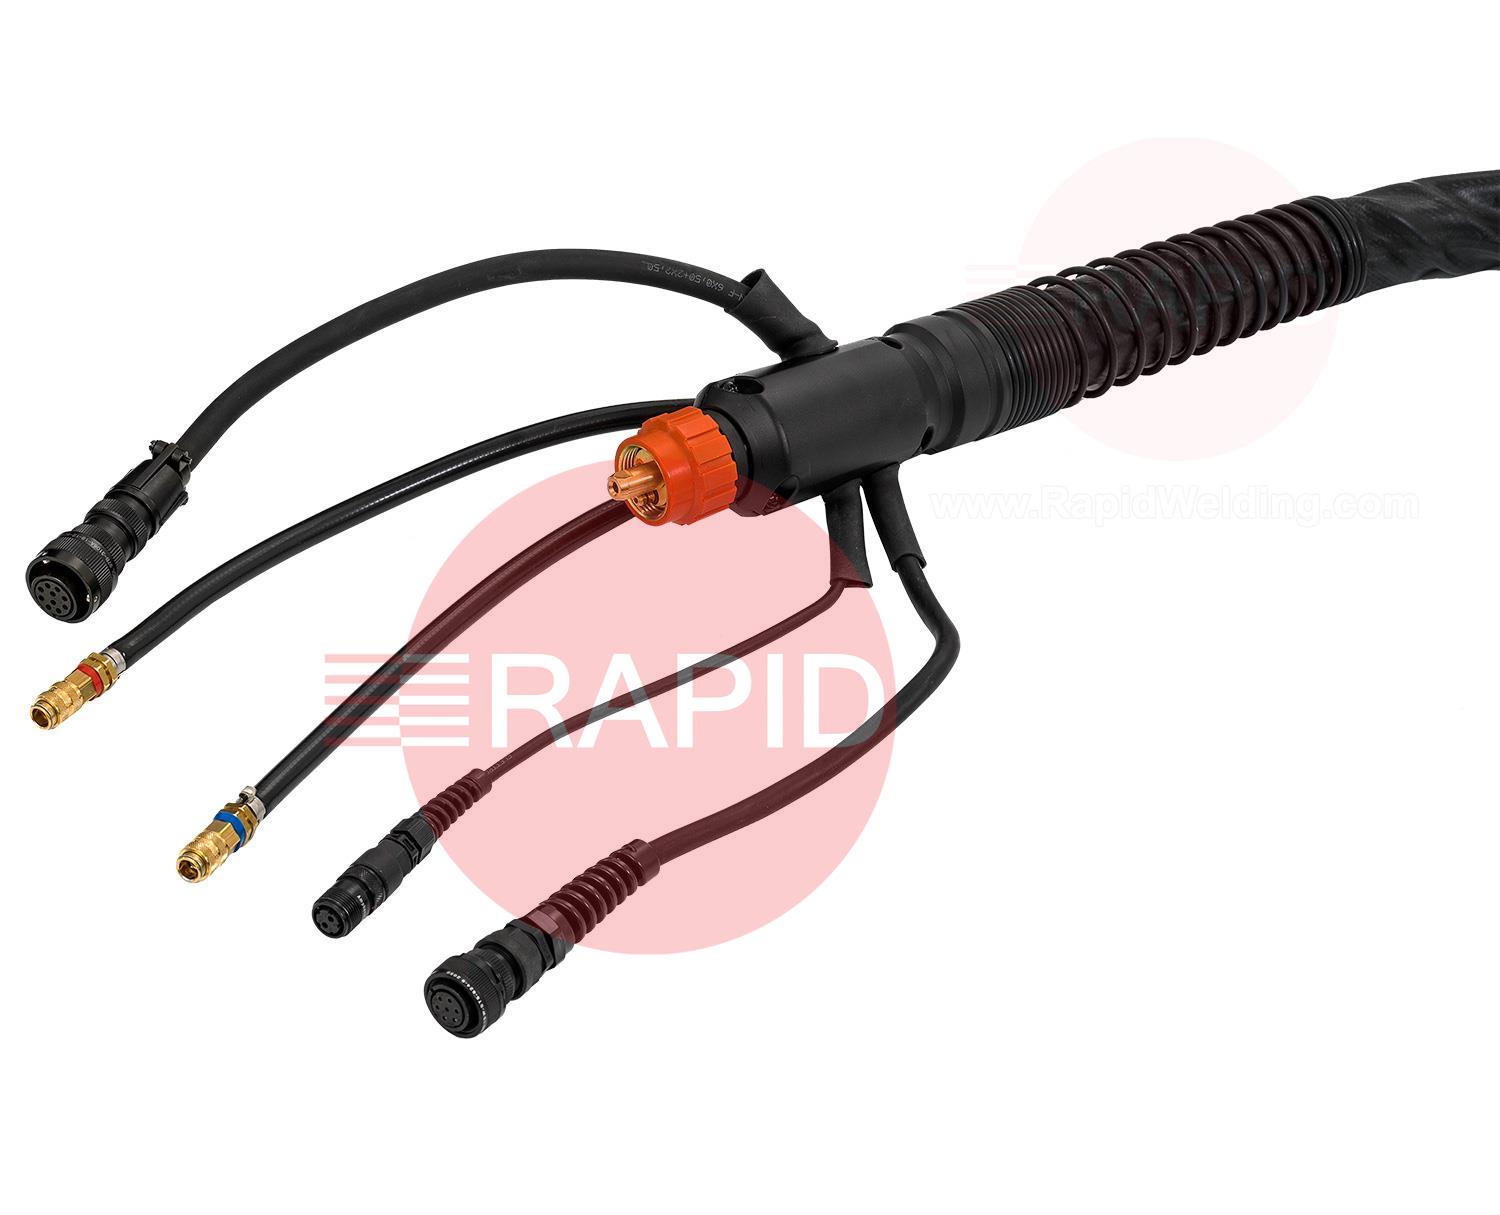 SGTXW255CBL  Kemppi Supersnake GTX Water Cooled Interconnection Cable (Std Liner FE 1.0-1.6mm) - 25m / 50mm2